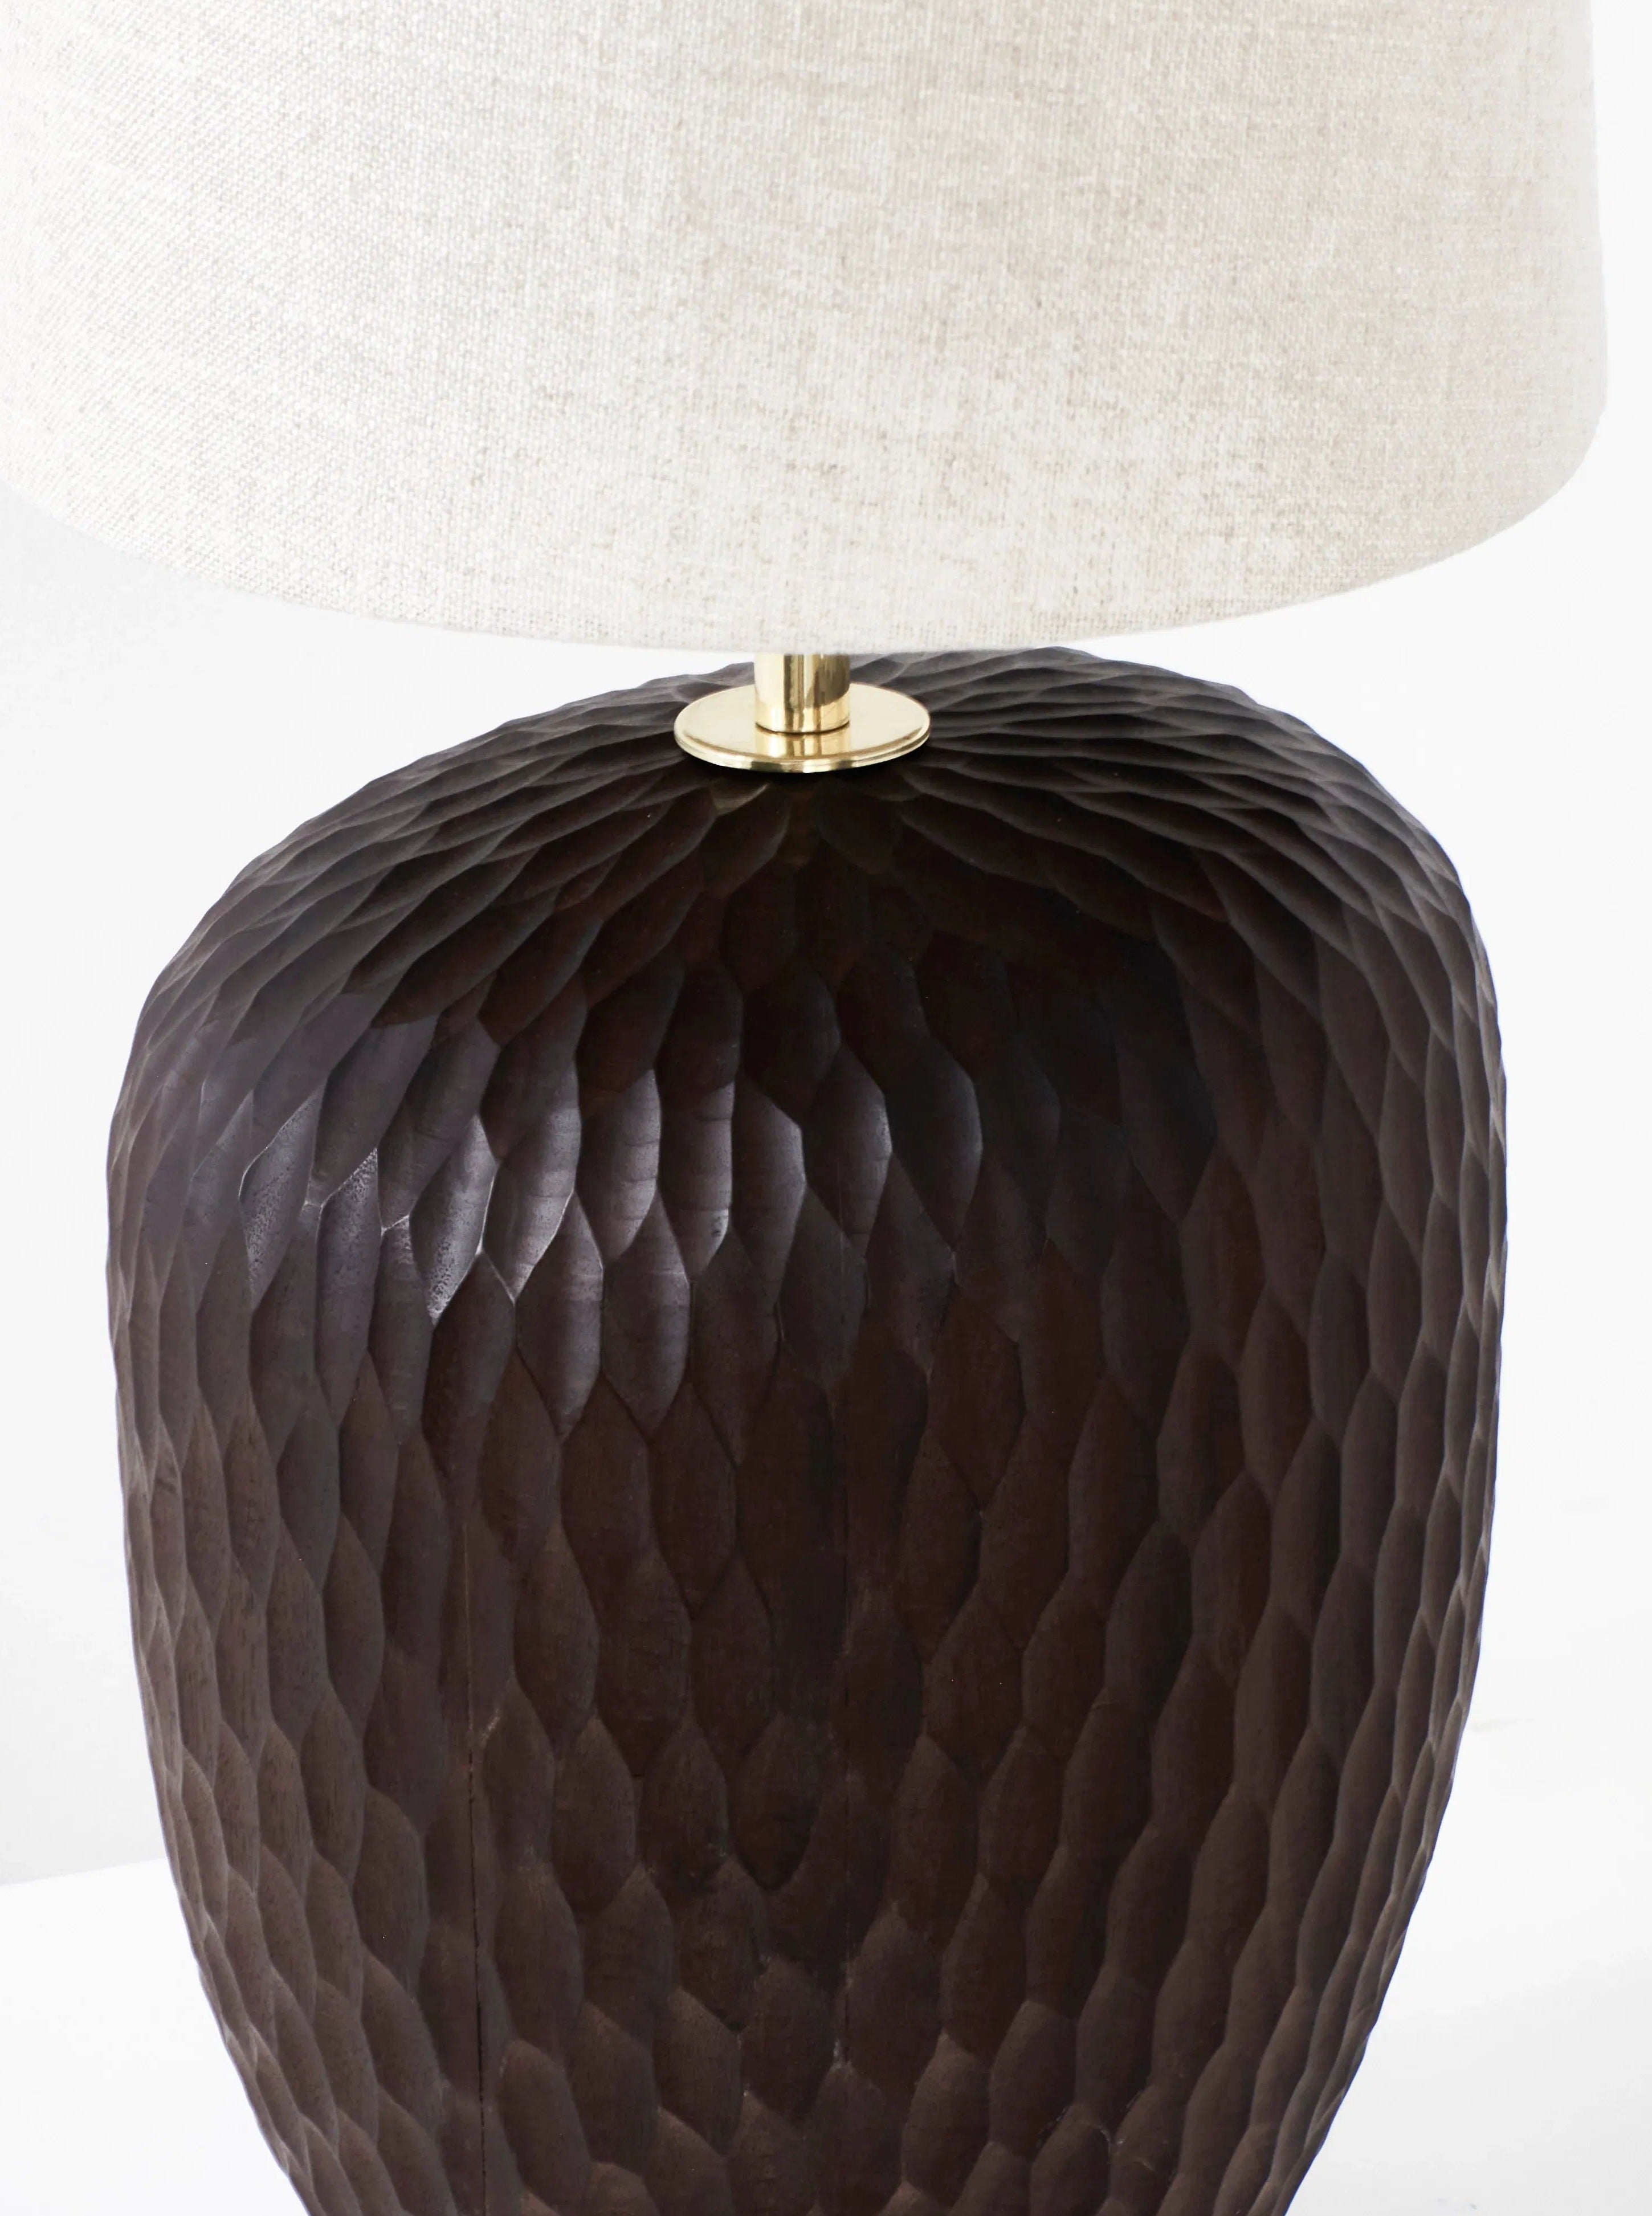 A Large Foz Lamp with a textured, dark brown base that resembles a hammered surface from Project 213A. The lamp features a white, fabric lampshade and a brass neck connecting the shade and base. This artisanal light exudes modern elegance with its handmade craftsmanship.